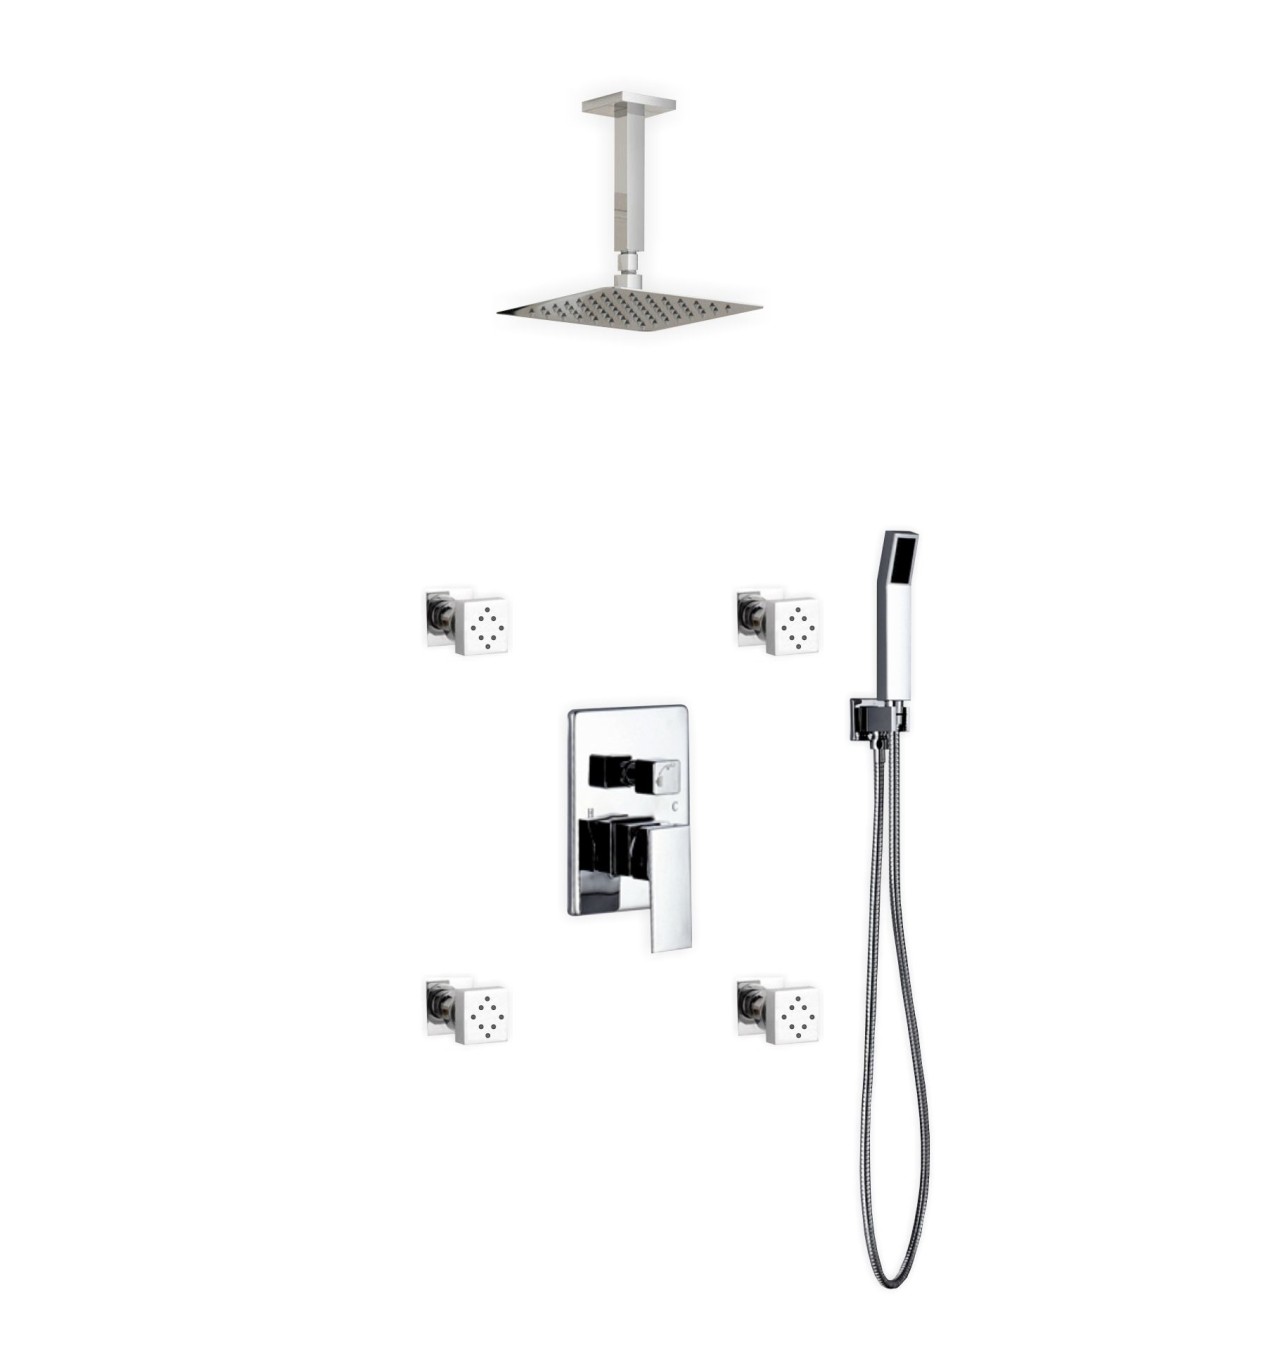 Aqua Piazza Brass Shower Set with 8" Ceiling Mount Square Rain Shower, Handheld and 4 Body Jets